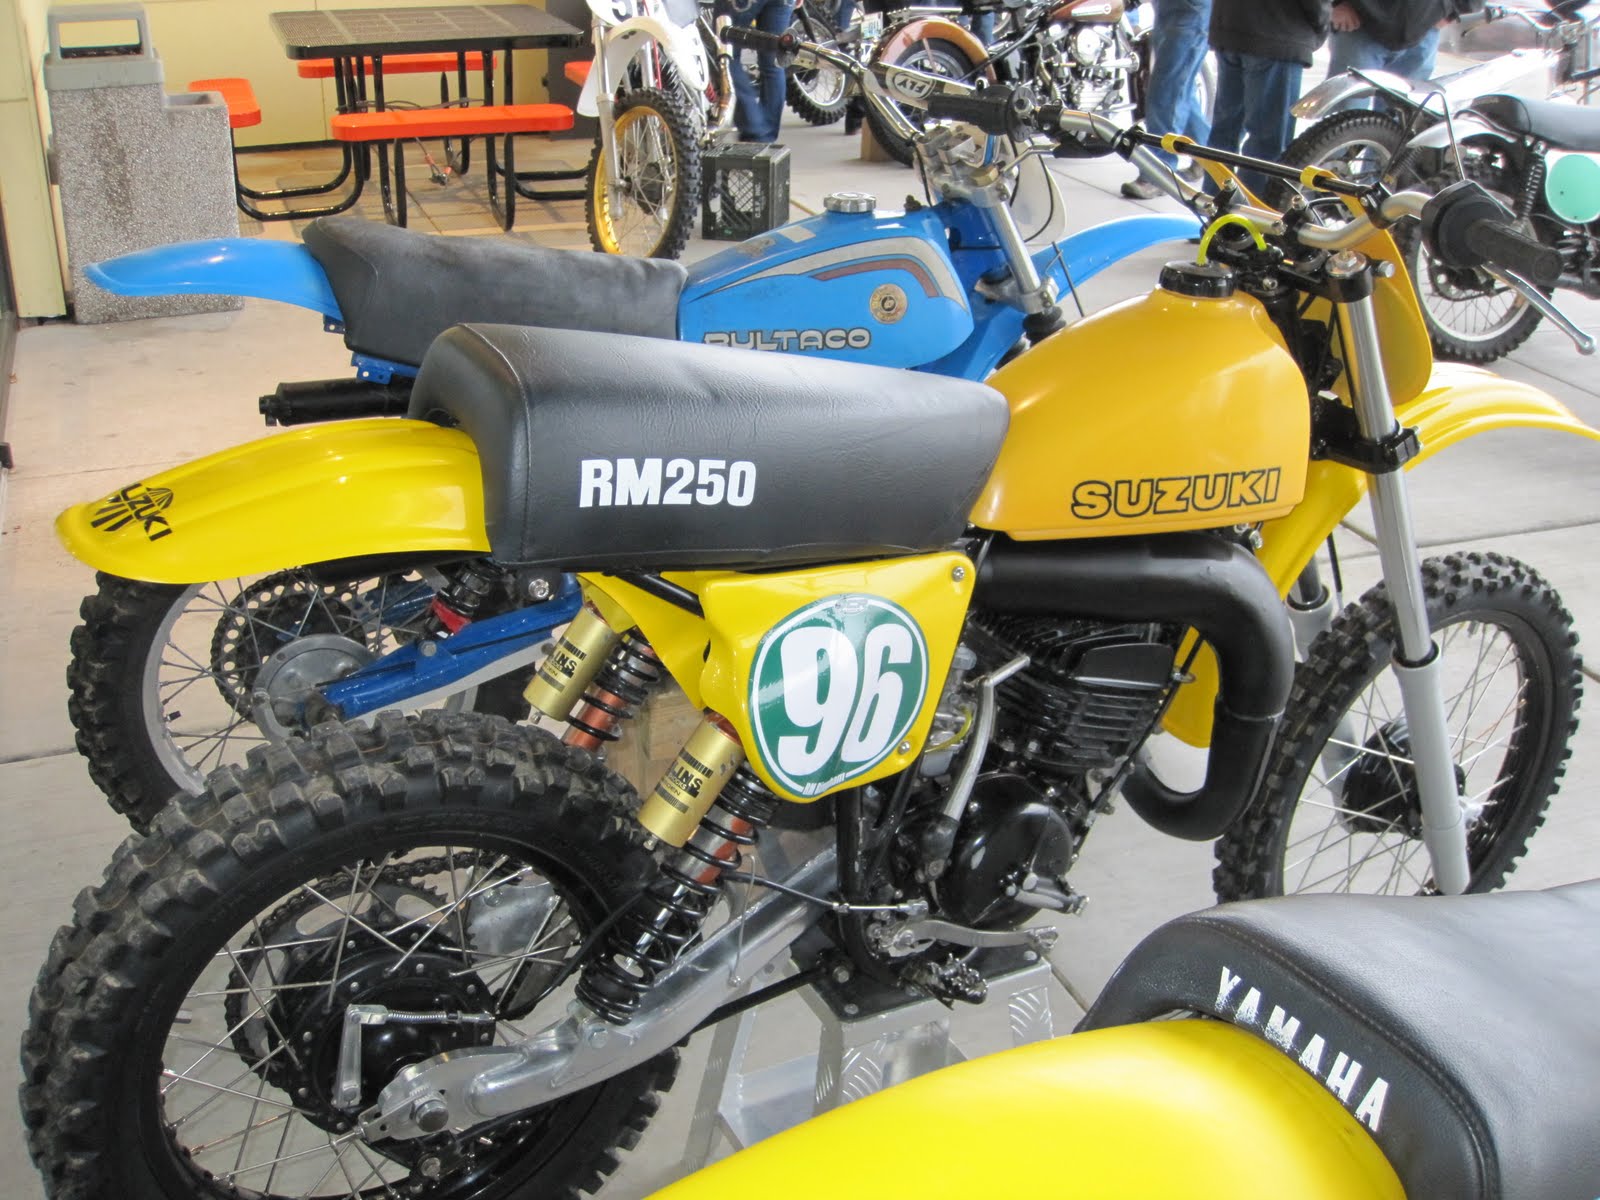 suzuki 250 2 stroke Nicely set up 1978 Suzuki RM250 - sweet. I'd dig riding one of these 